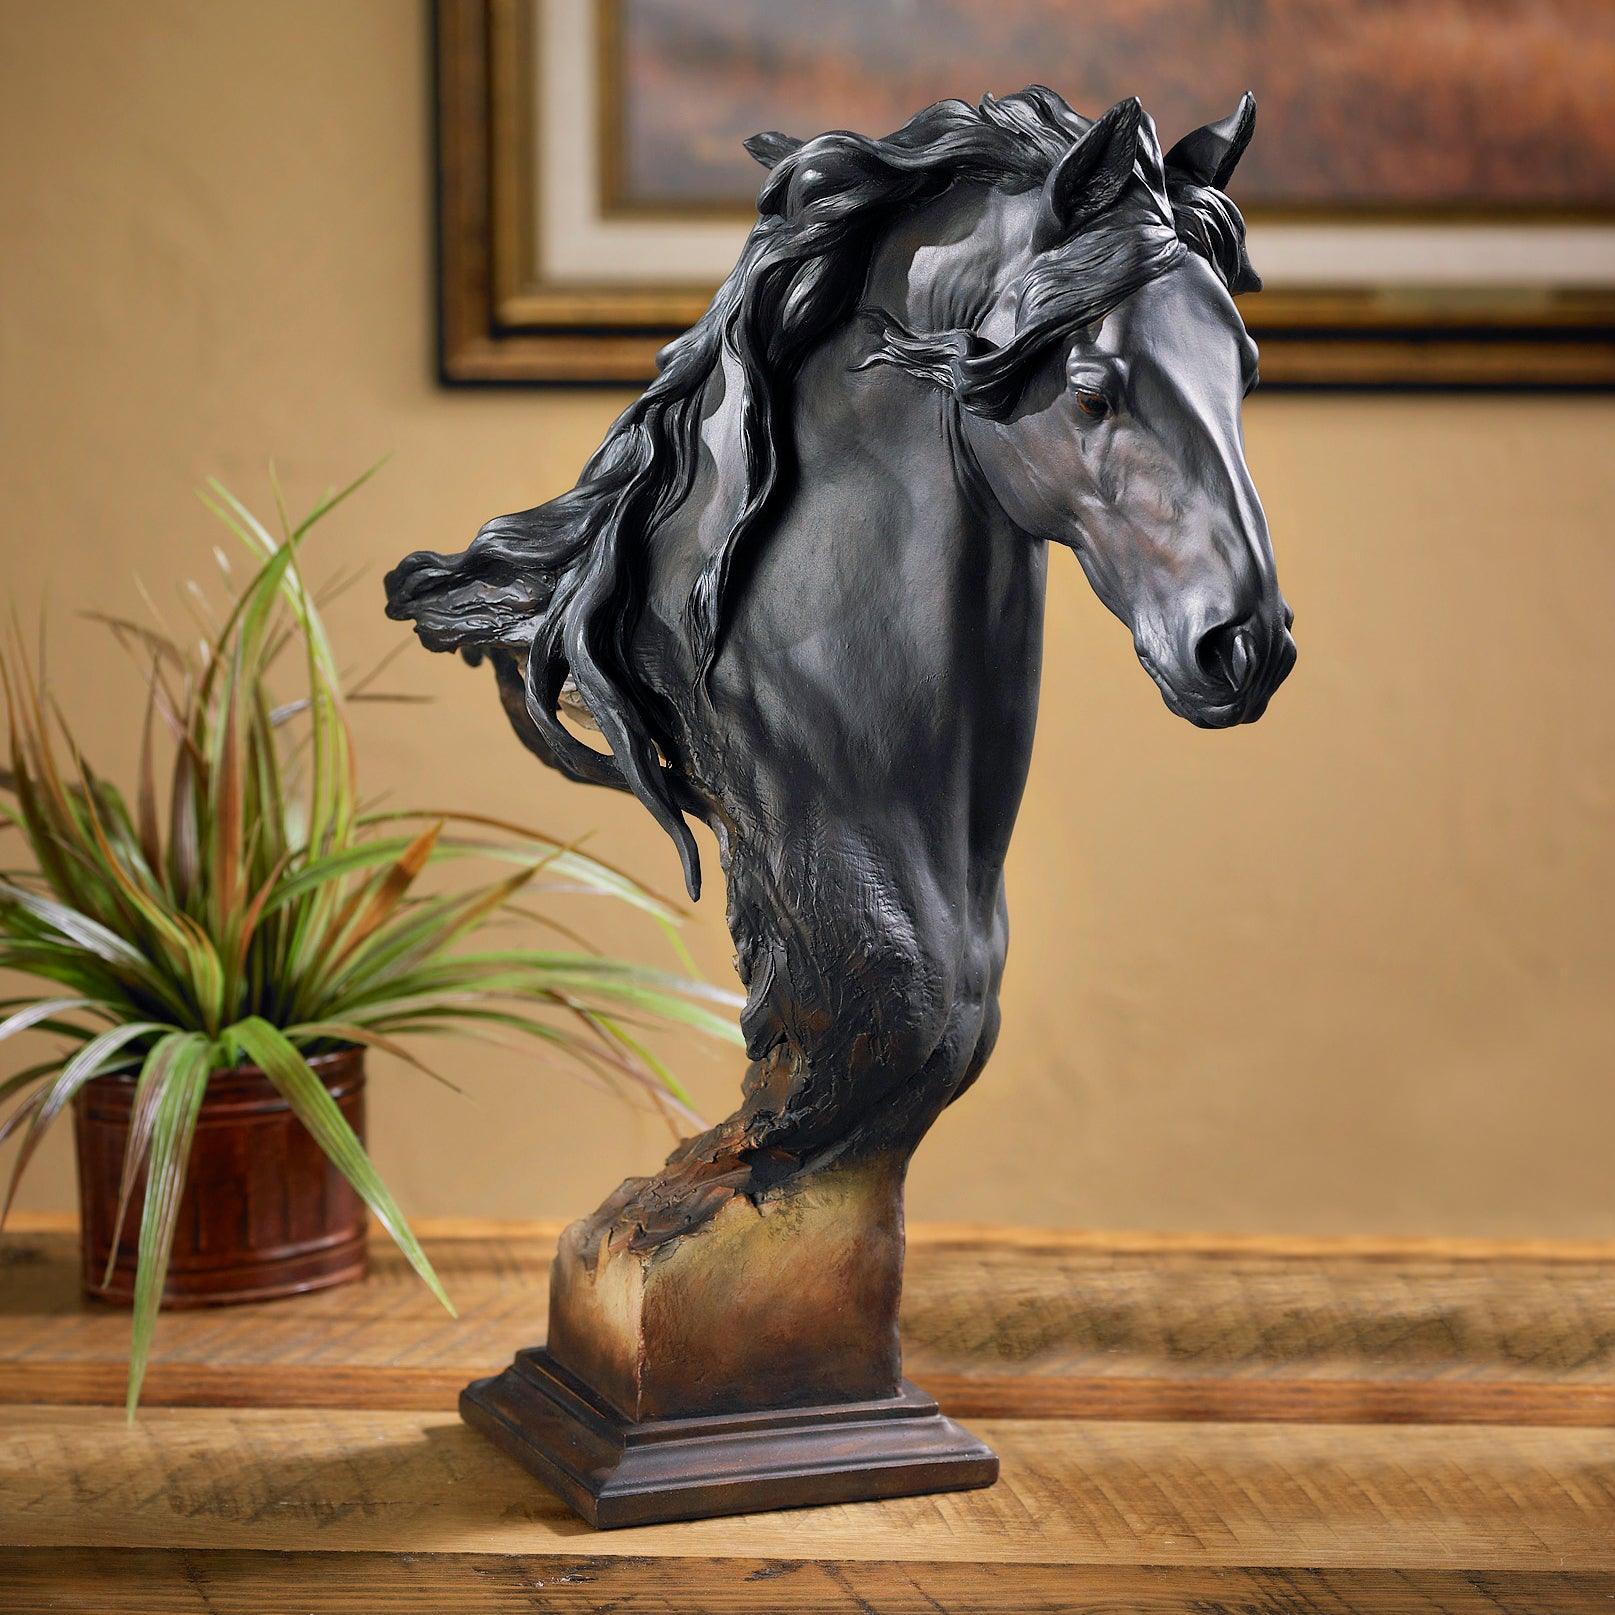 Equus Onyx - Fresian Horse - Small Mill Creek Sculpture - Wild Wings